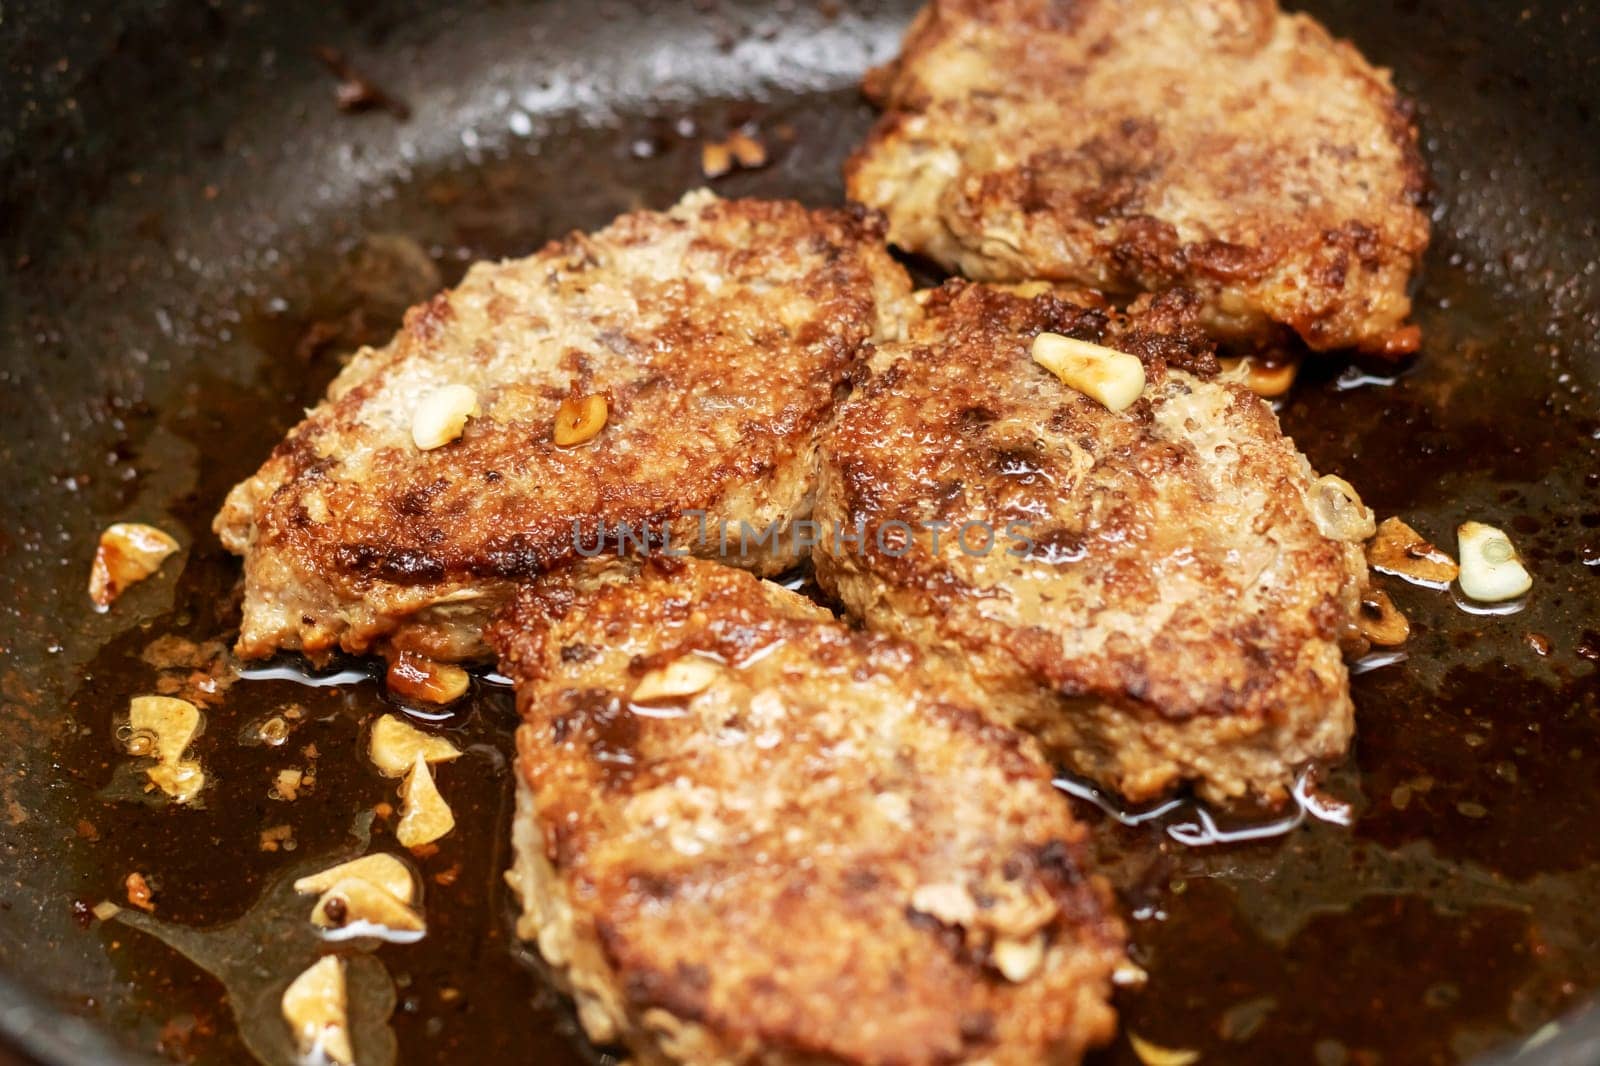 A cut of meat is sizzling in a frying pan, being cooked to perfection. This dish is a classic example of deep frying in cuisine, creating a delicious fried food ingredient